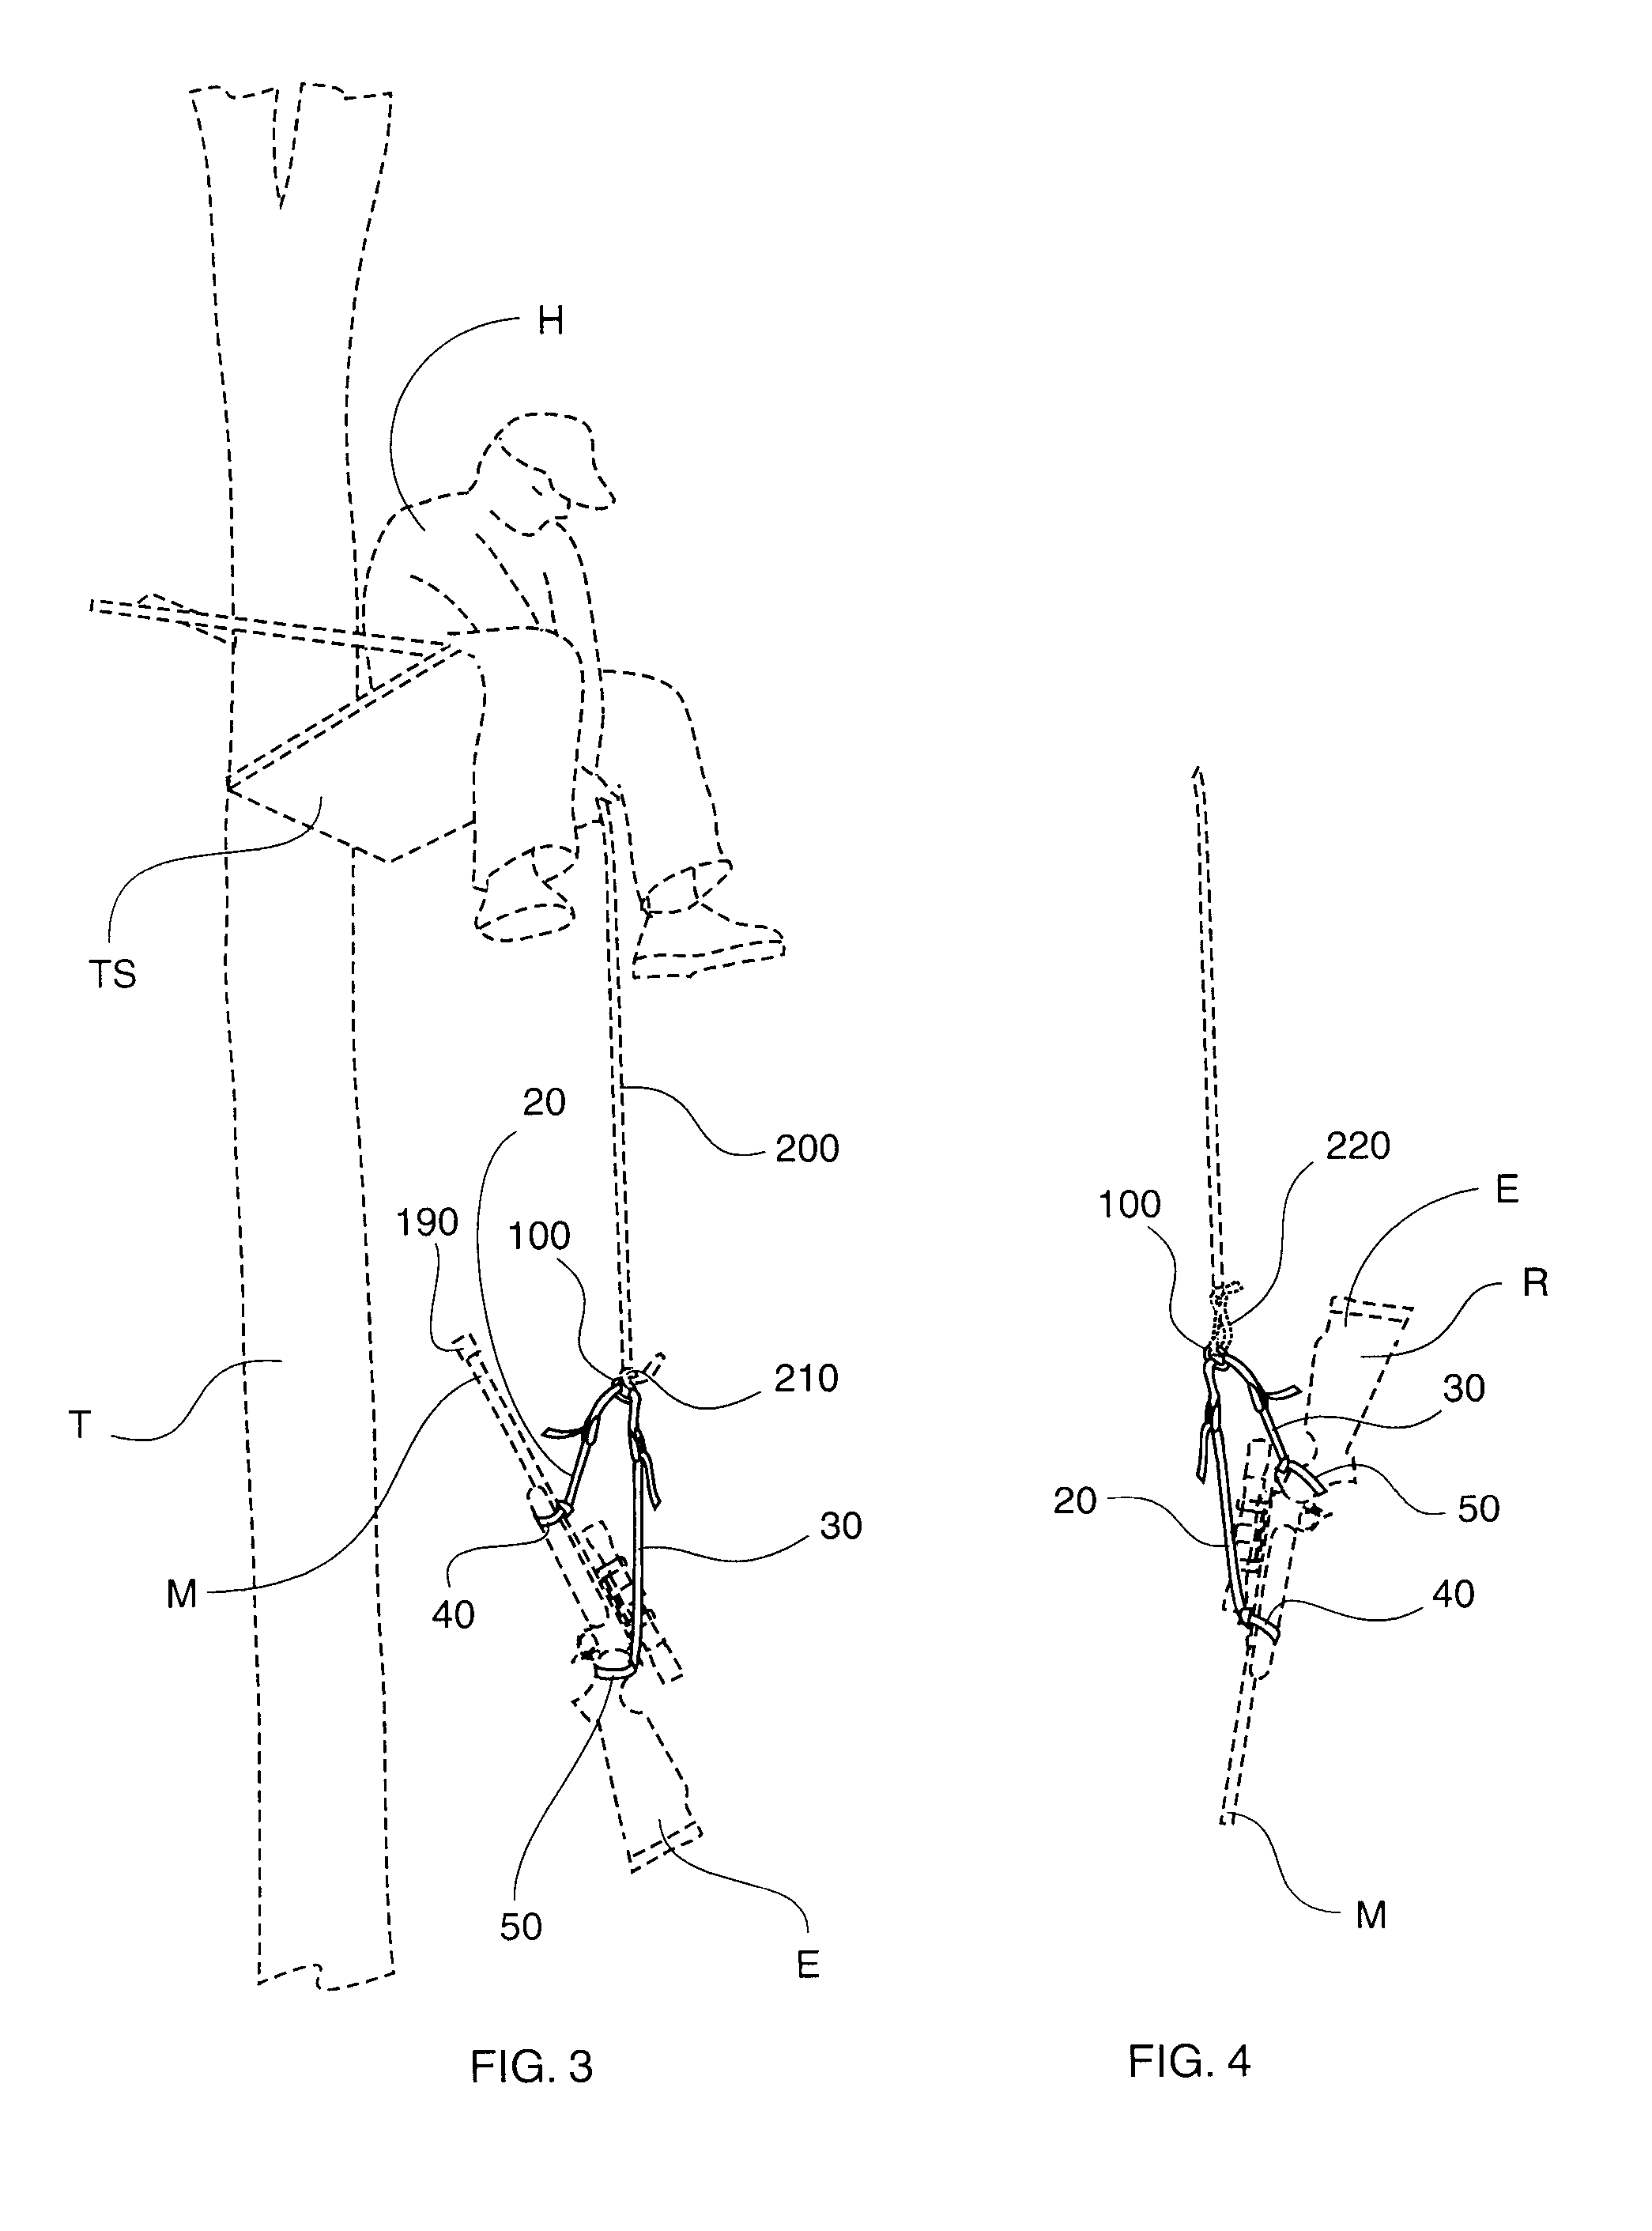 Rifle Sling and Method of Use Thereof